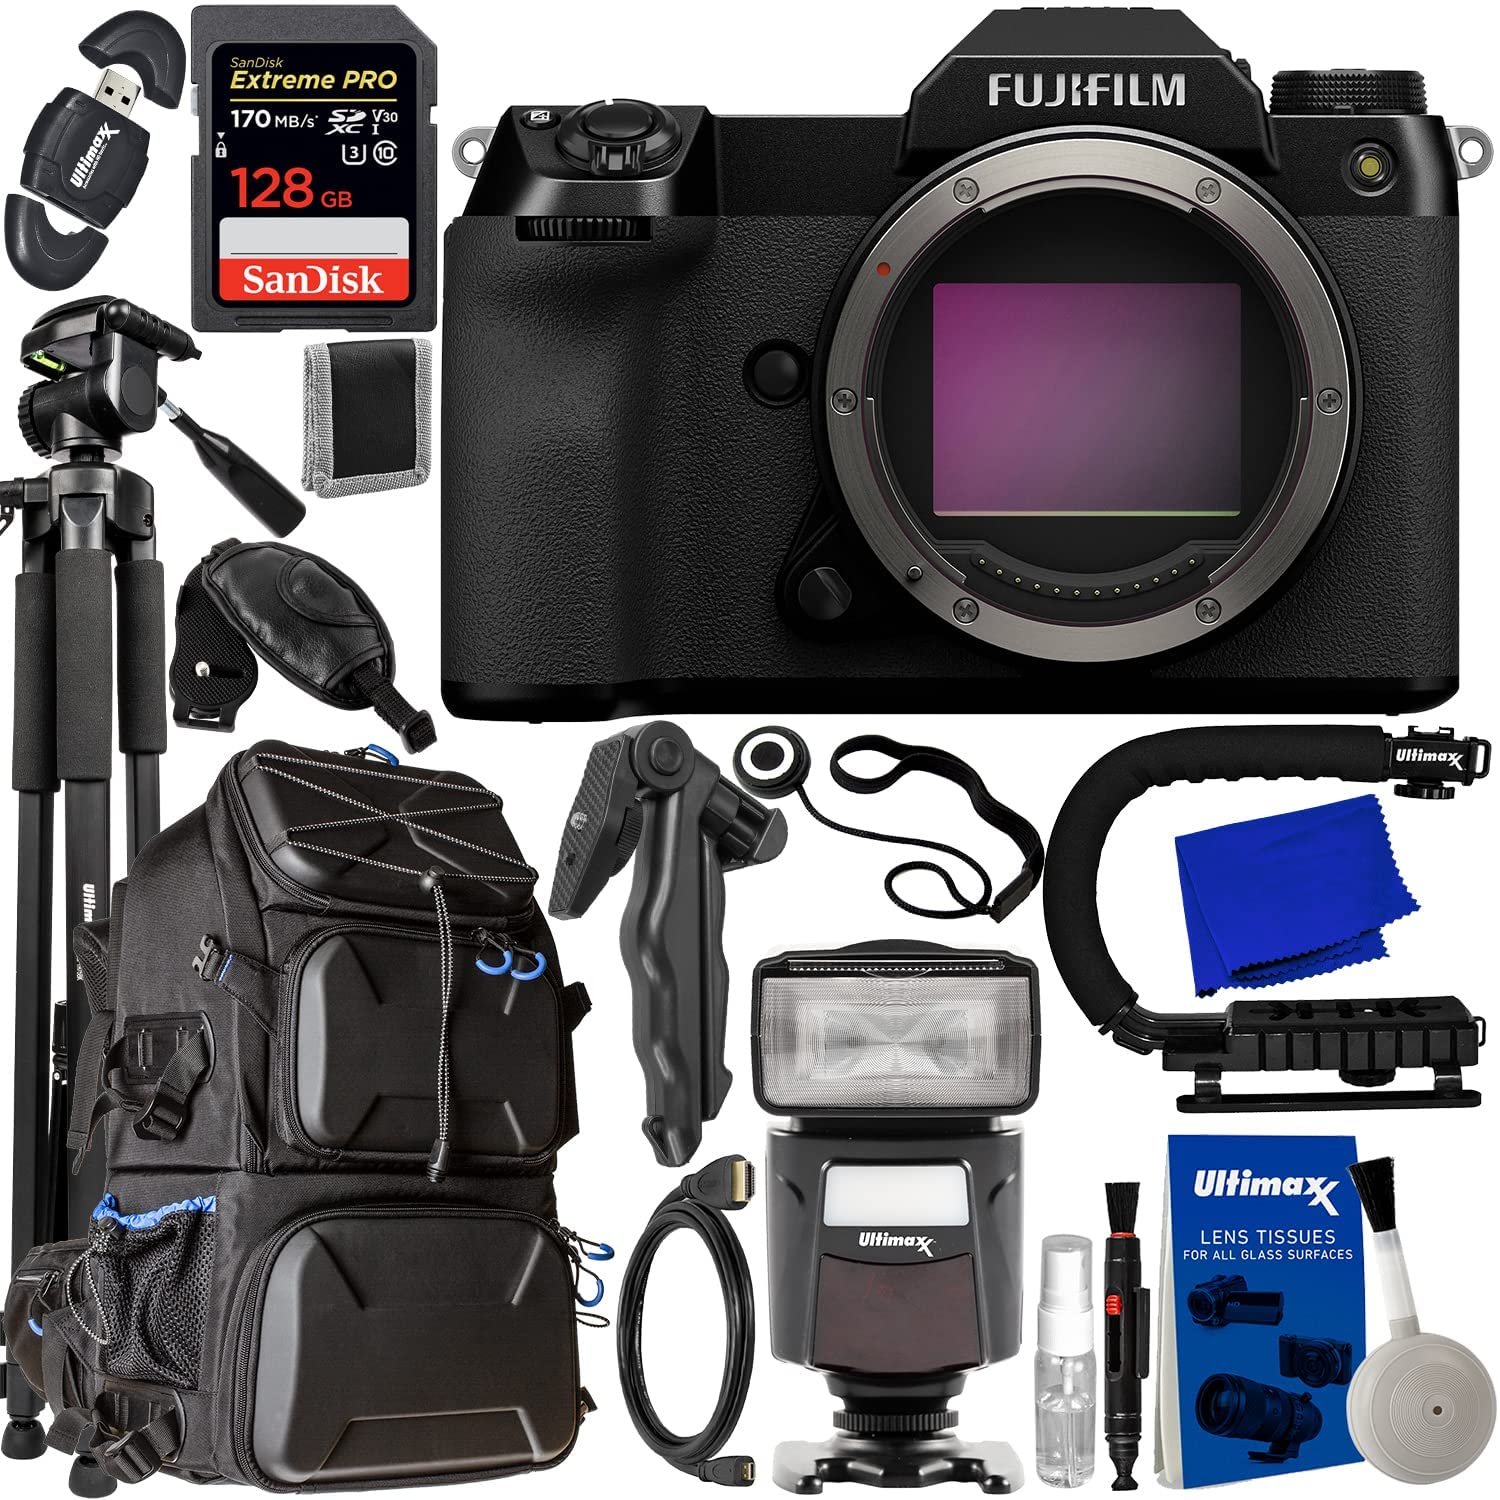 FUJIFILM GFX 50S II Medium Format Mirrorless Camera (Body Only) + SanDisk 128GB Extreme Pro SDXC, Deluxe Hard-Shell Camera Backpack, Universal Speedlite with LED Video Light & Much More (24pc Bundle)